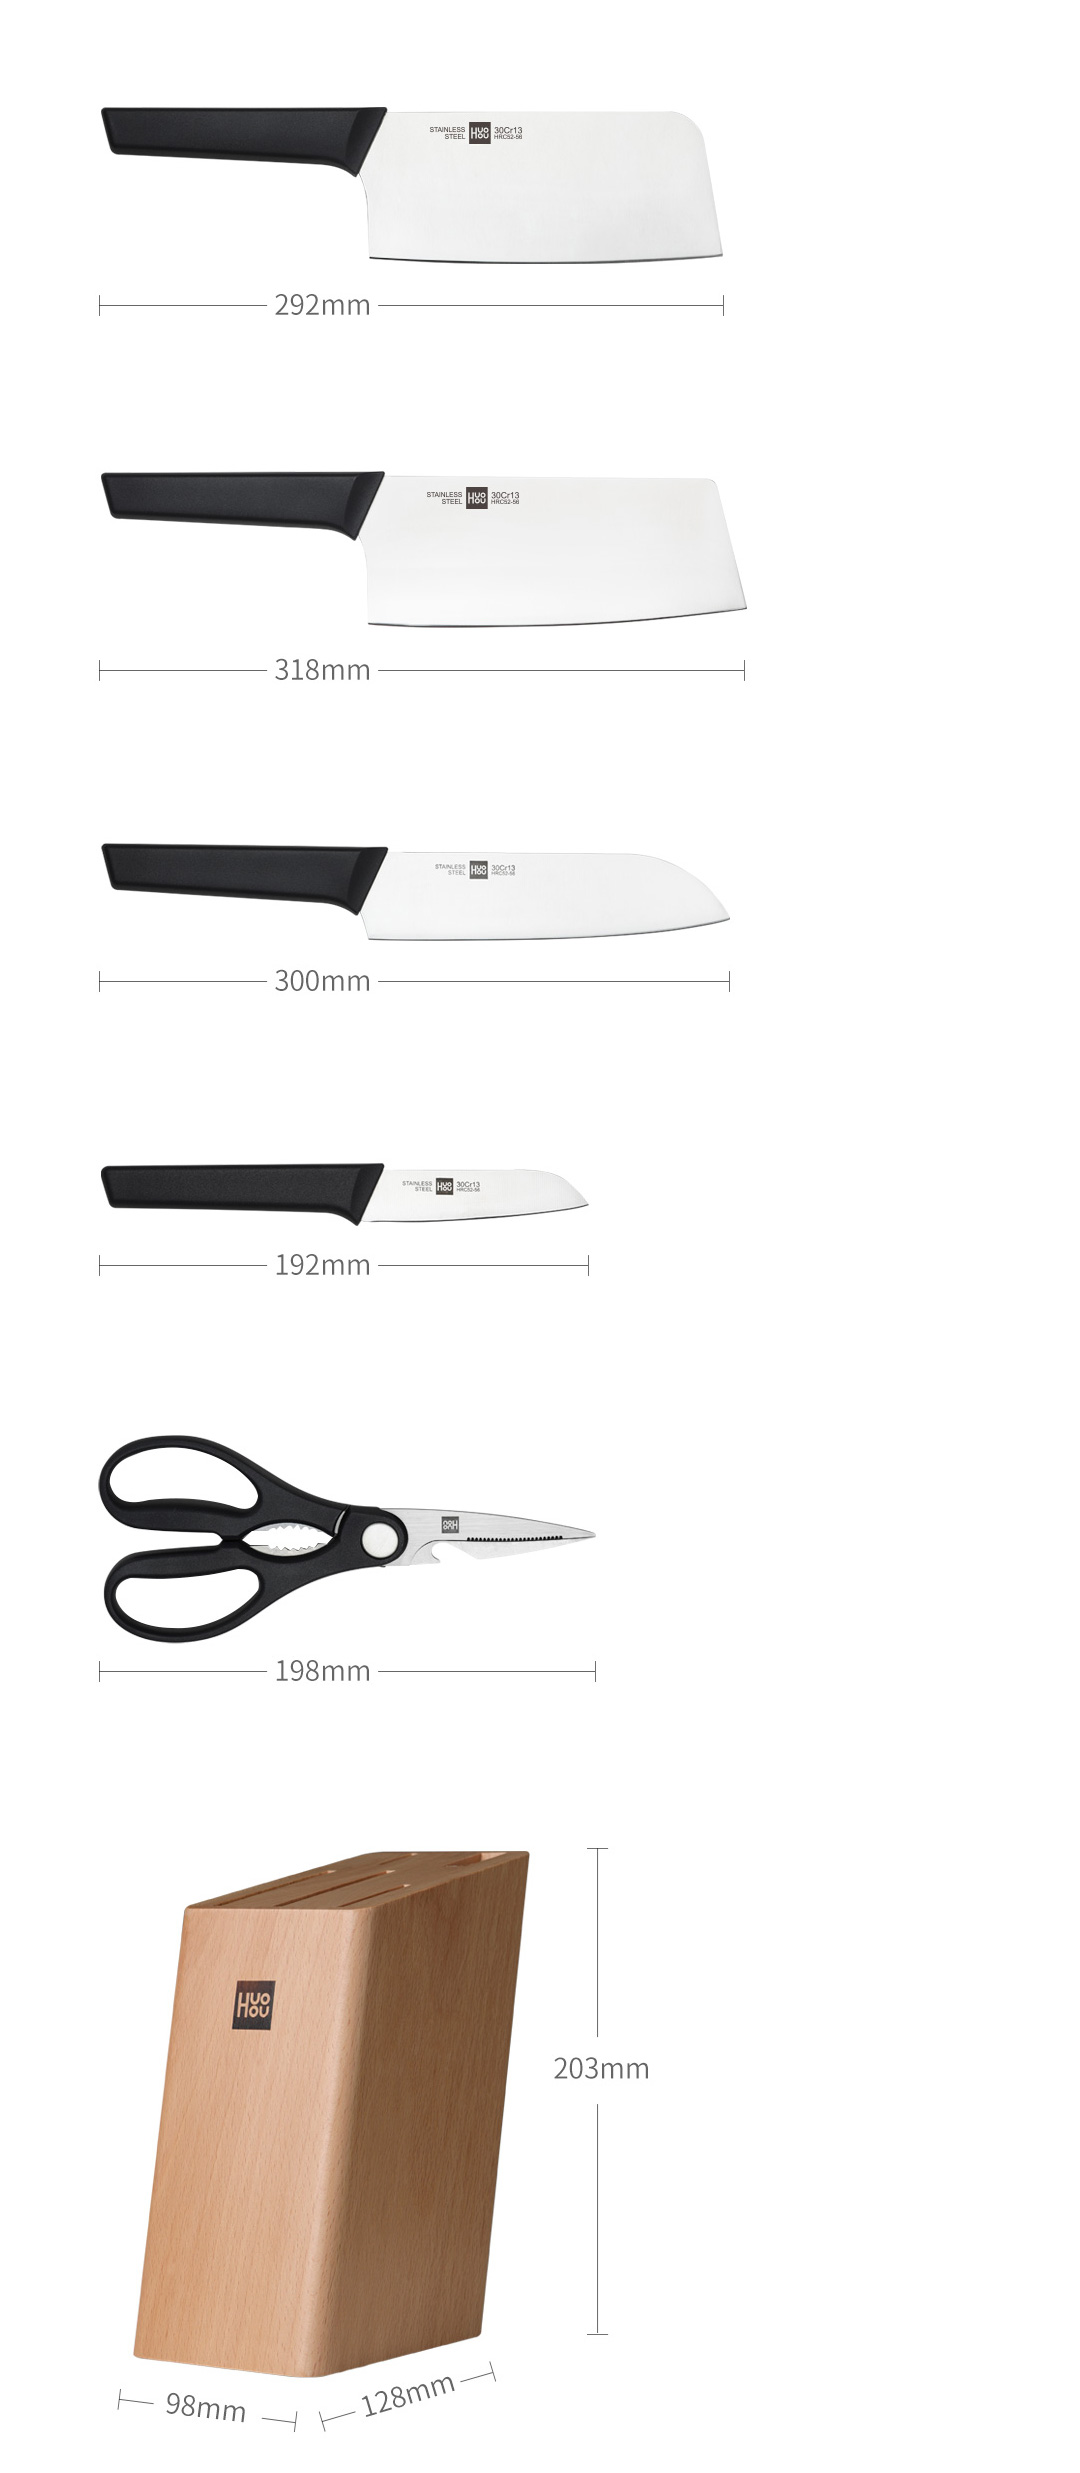 HuoHou Youth Edition 6-in-1 Stainless Steel Knife Set